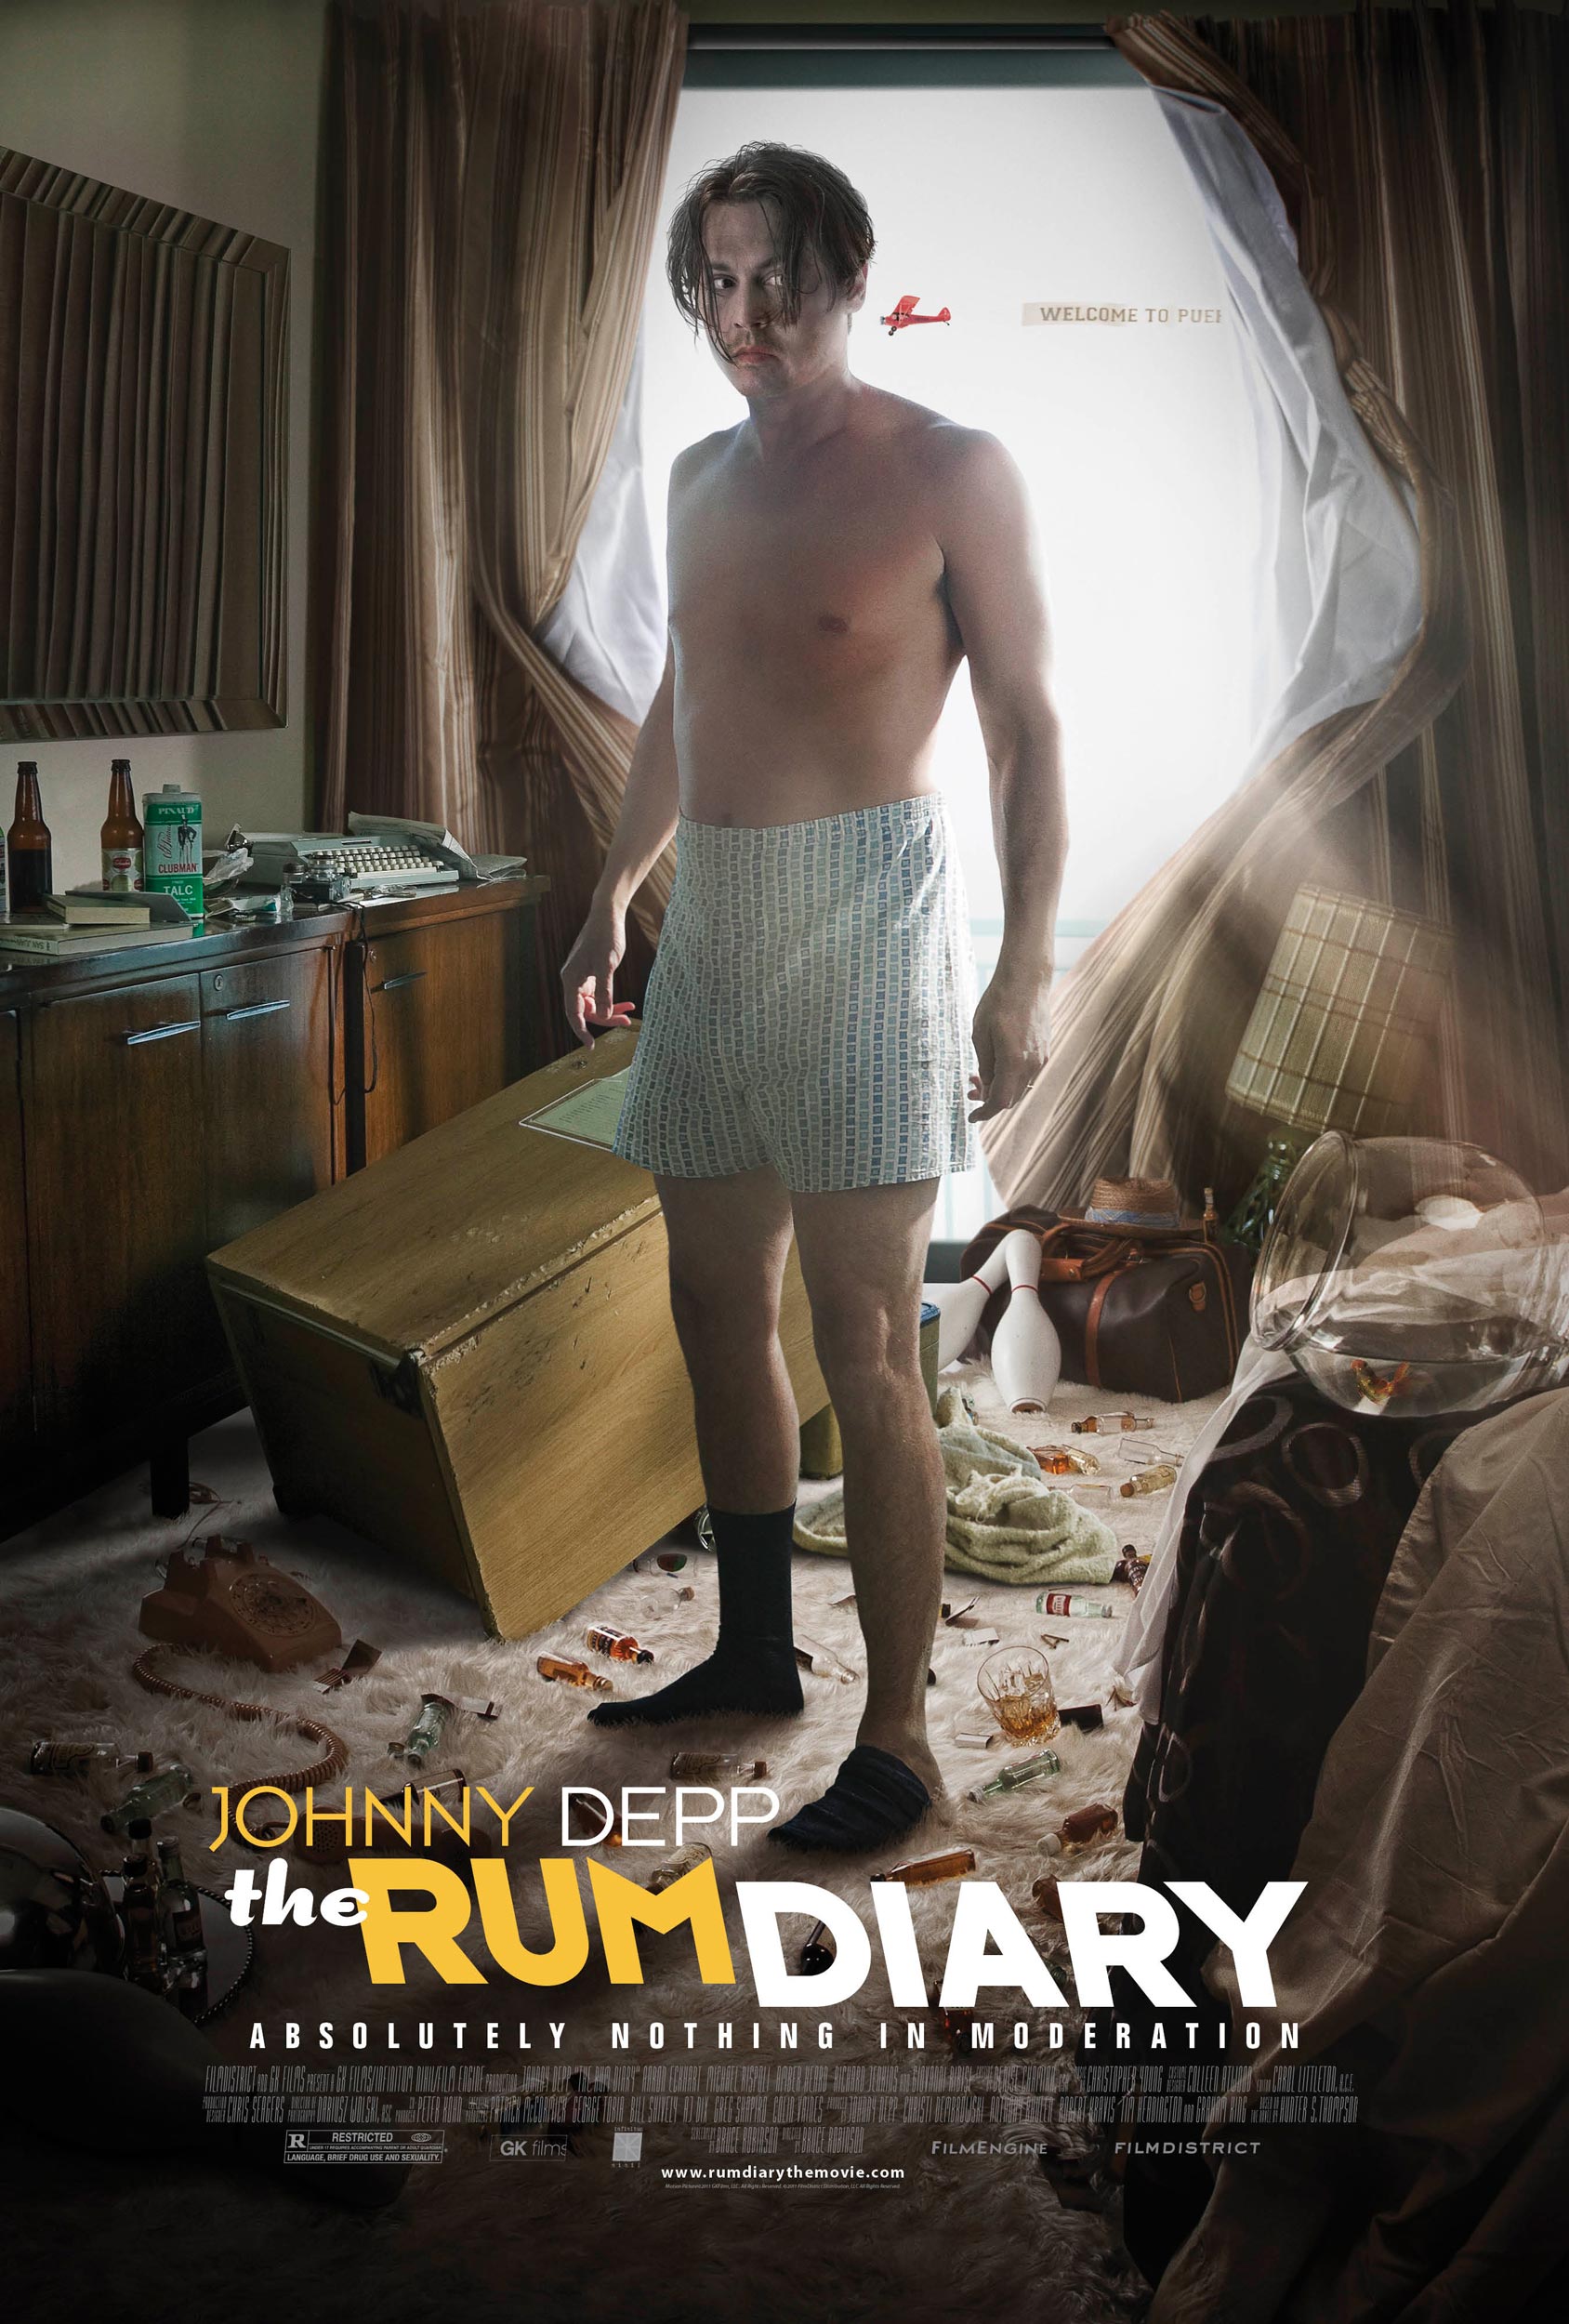 THE RUM DIARY Poster (final)